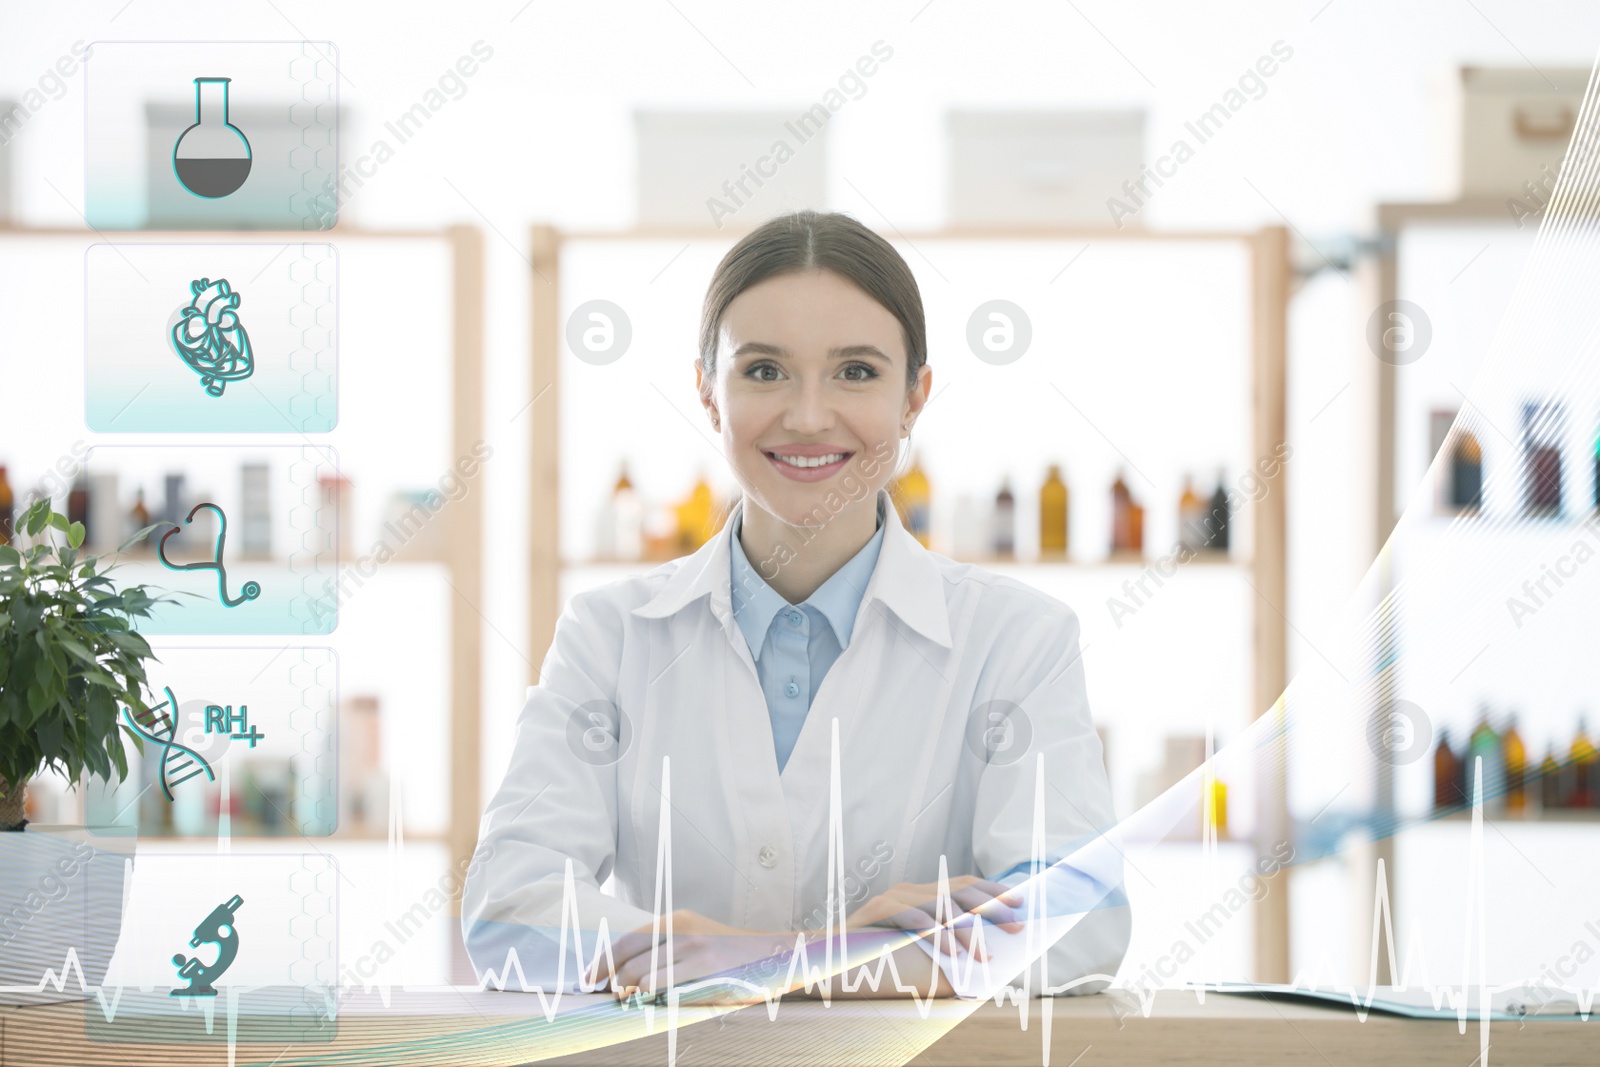 Image of Virtual icons and professional pharmacist in drugstore